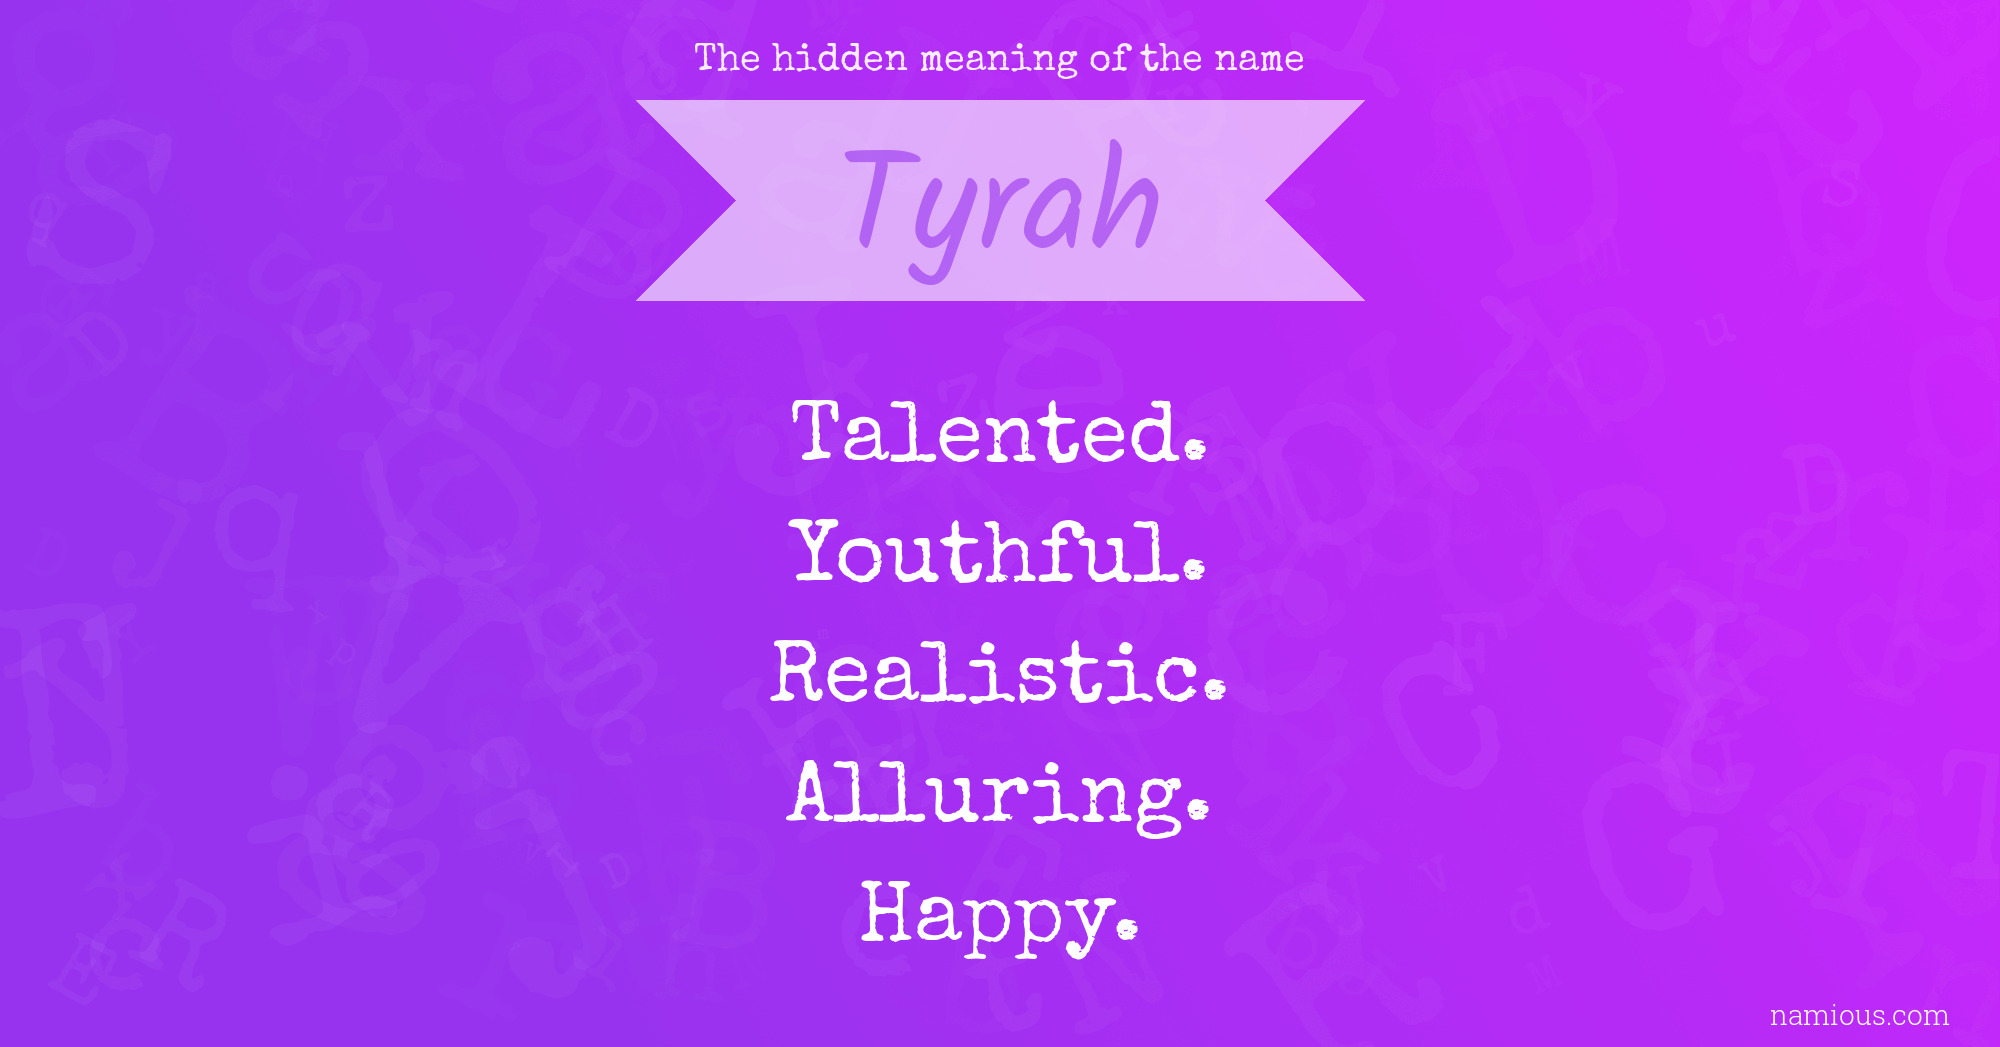 The hidden meaning of the name Tyrah